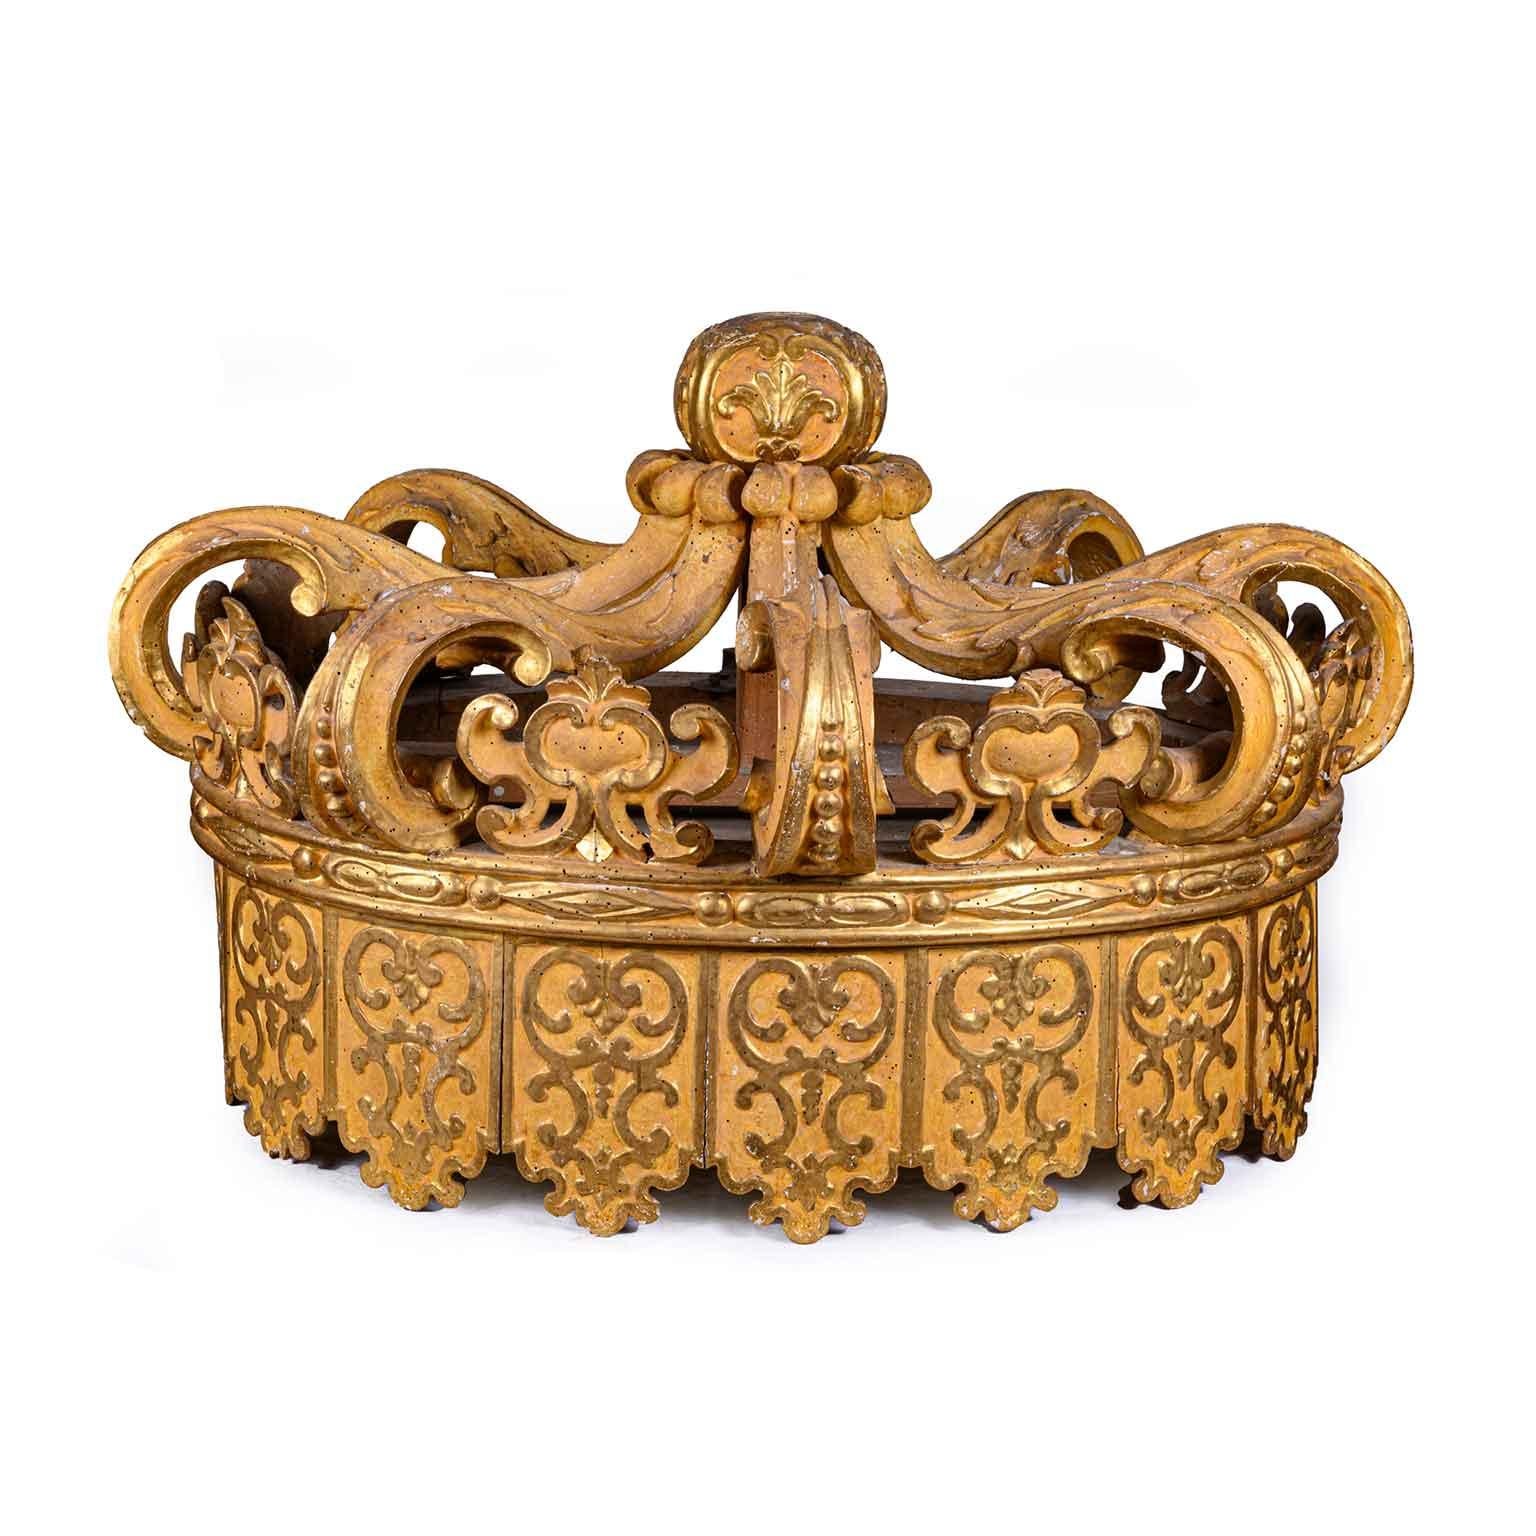 A monumental and rare Italian early 18th century Louis XIV period giltwood bed canape in the shape of an oval crown. This antique, luxury bed throne corona, from which the Baldacchino canopy drape suspends over the bedstead, has an original parcel